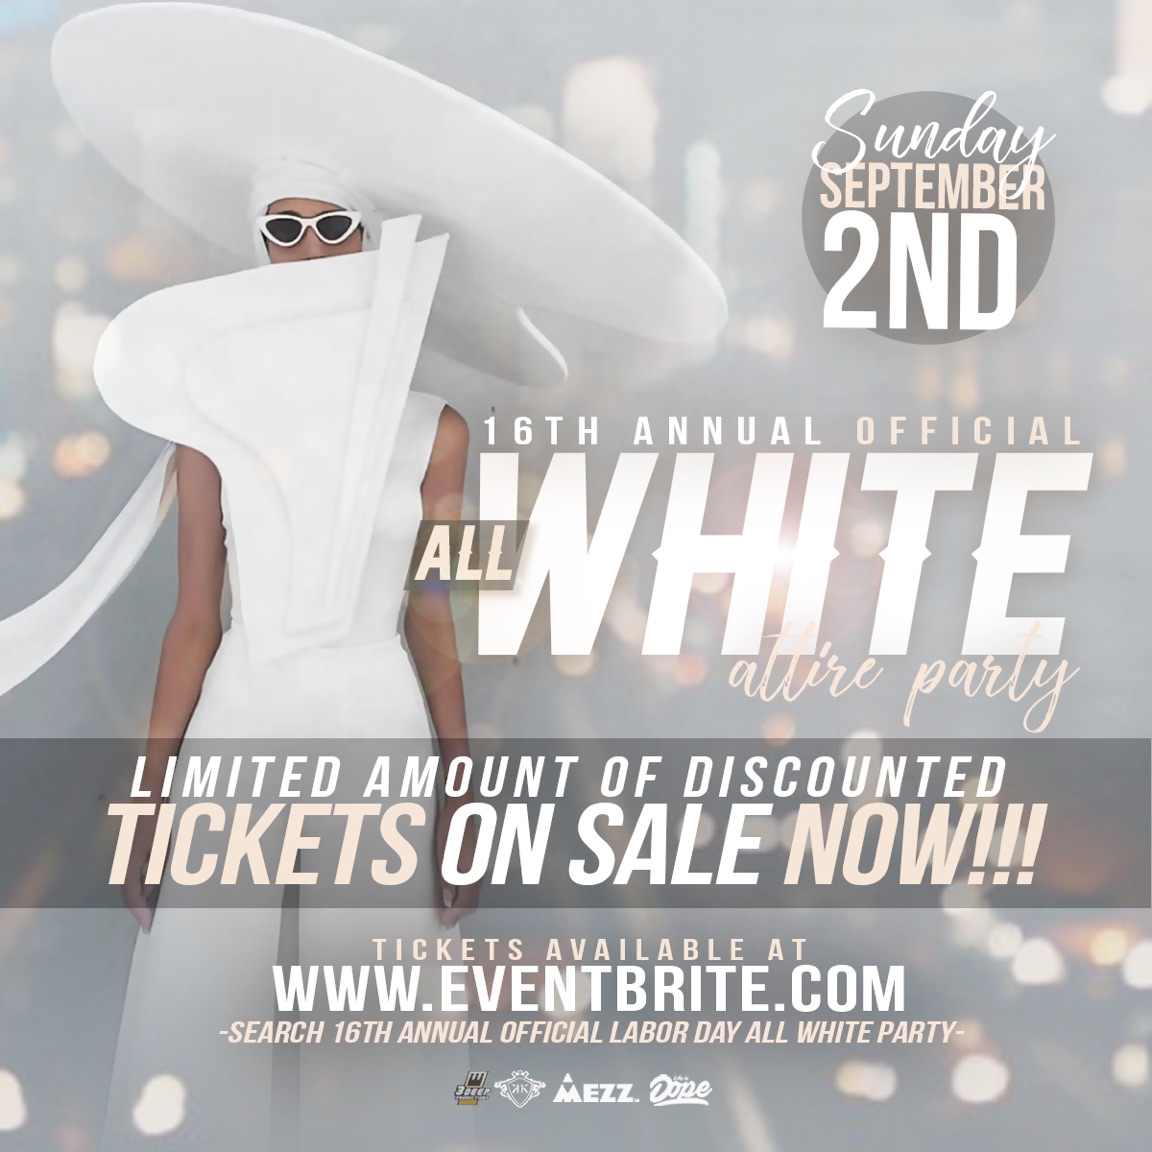 16th Annual Official All White Party Tickets 09/02/18